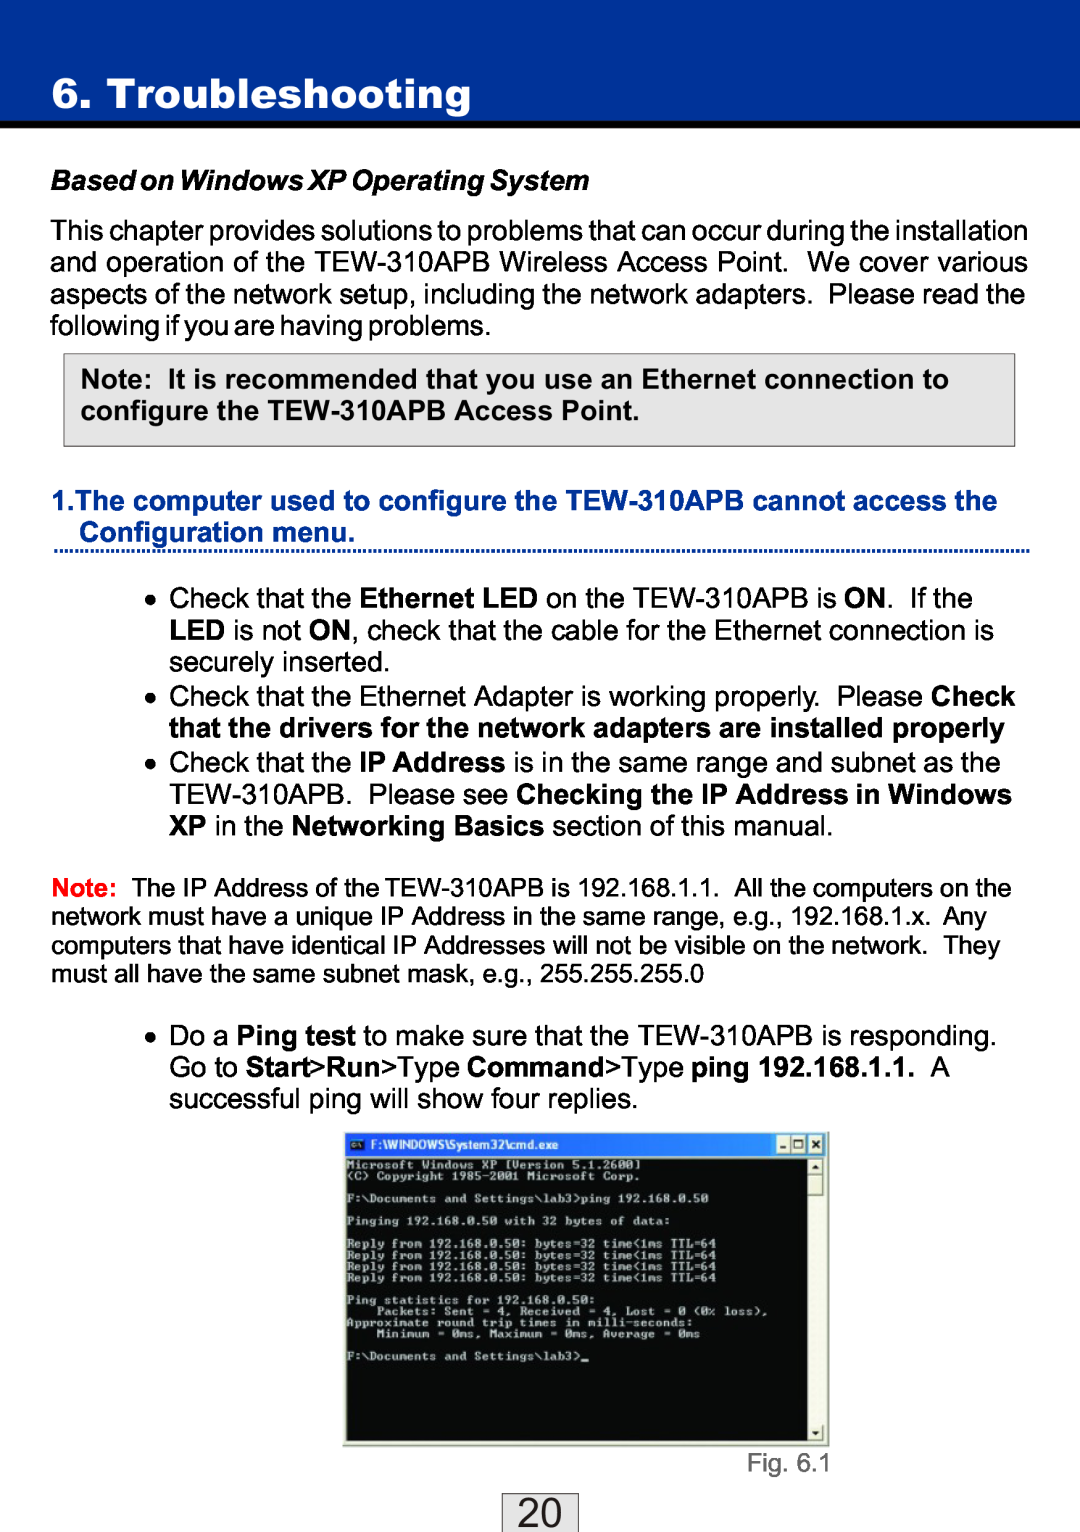 TRENDnet TEW-310APBX manual Troubleshooting, Based on Windows XP Operating System 